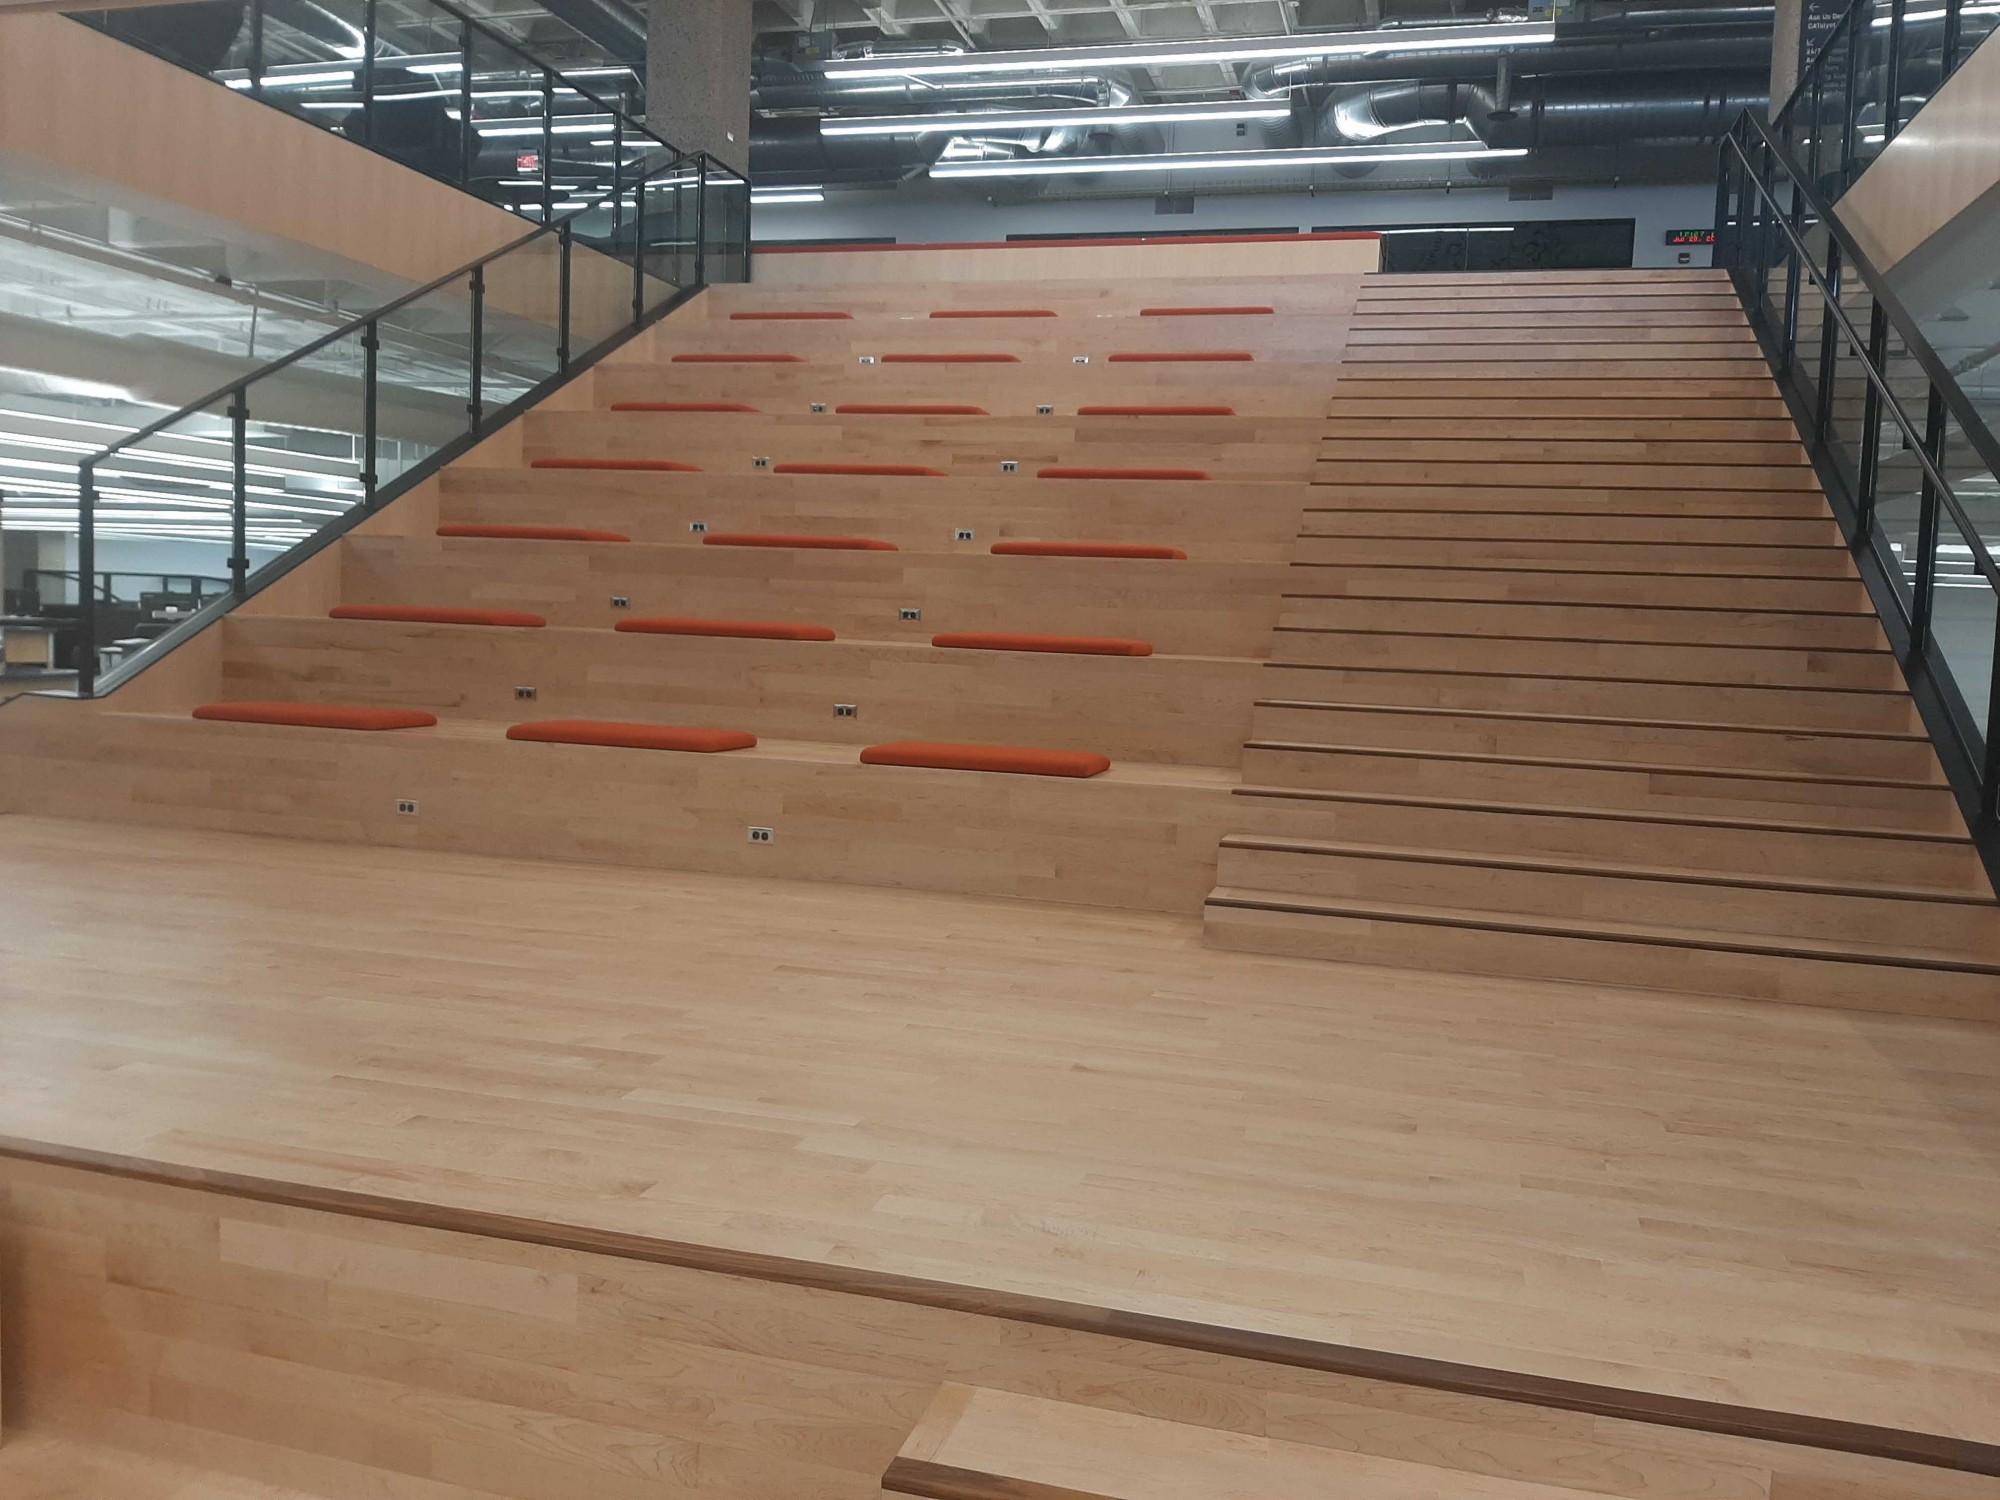 The new staircase in the Main Library connecting the first and second floors in the large study room on July 20. The staircase also doubles as classroom space, with orange cushions for seating and a dropdown projector board at the bottom.